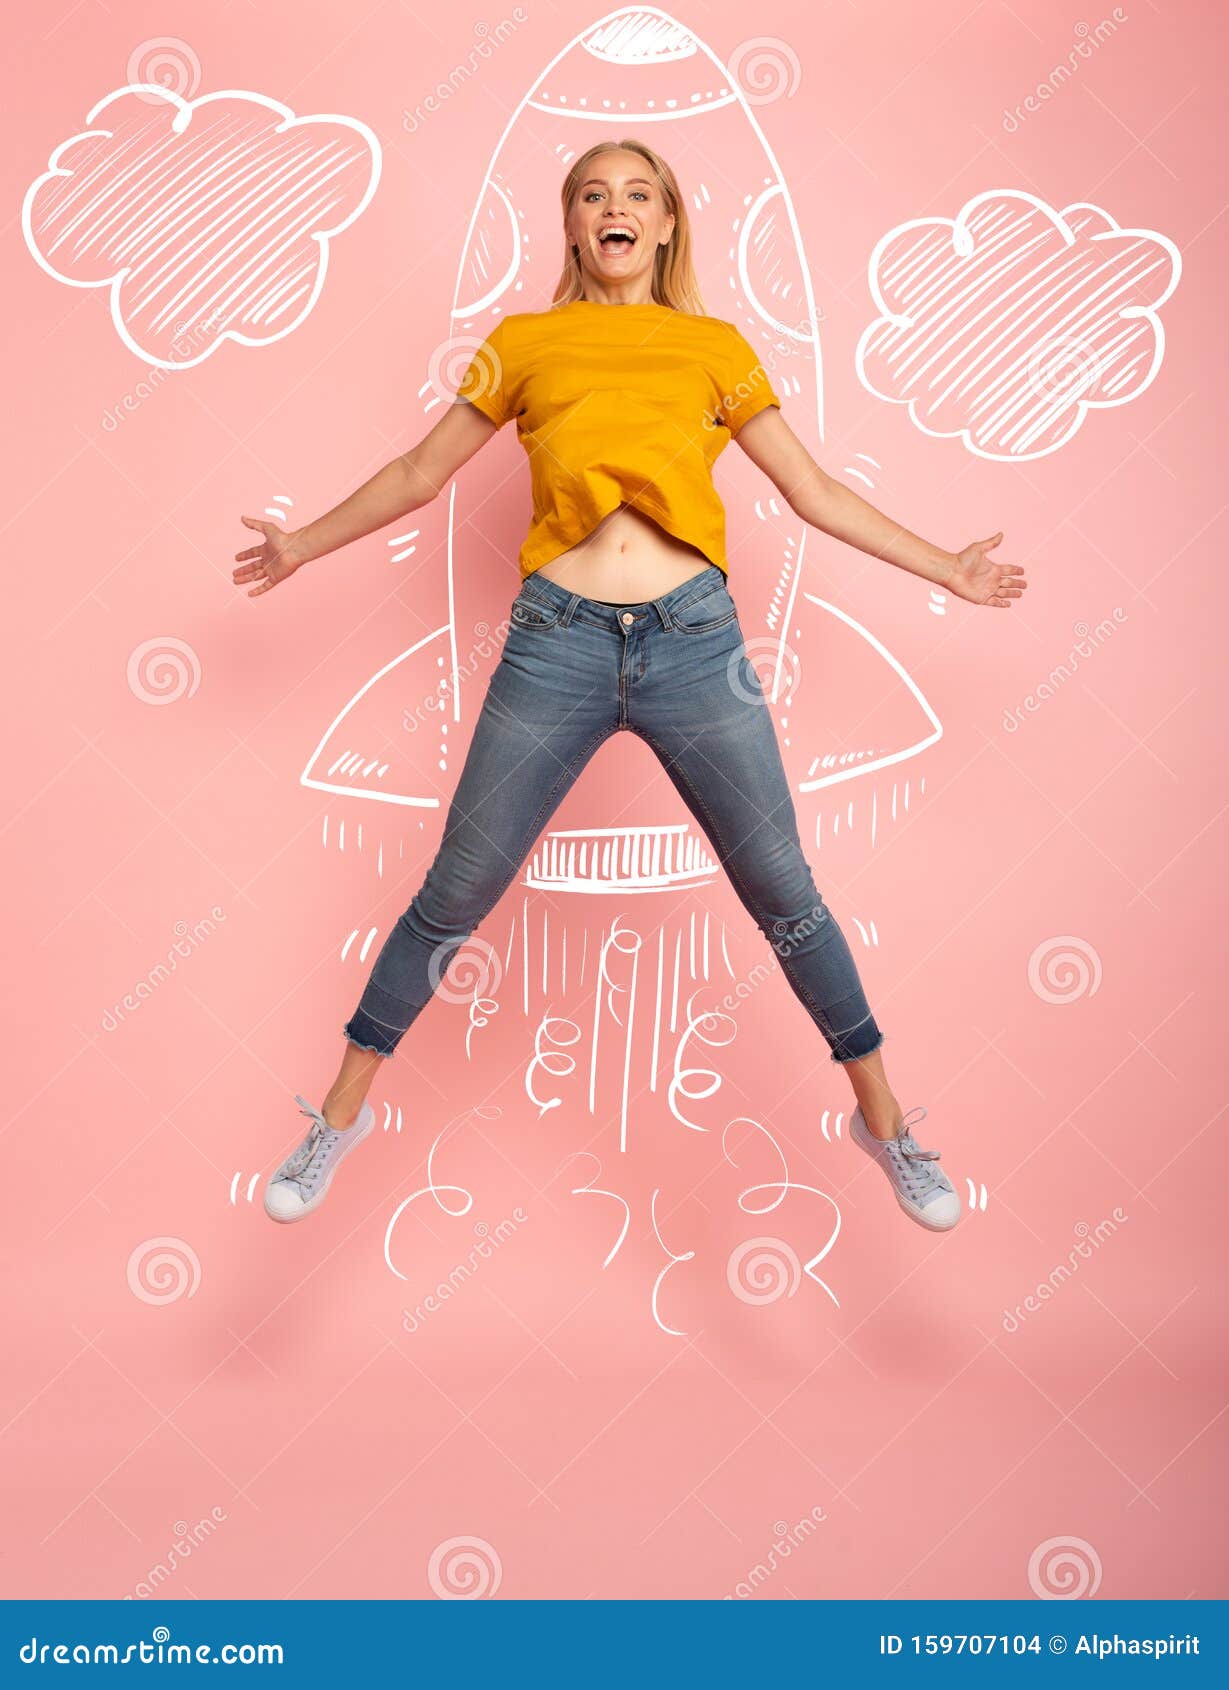 girl jumps on pink background ready to fly like a rocket. concept of freedom, energy and vitality